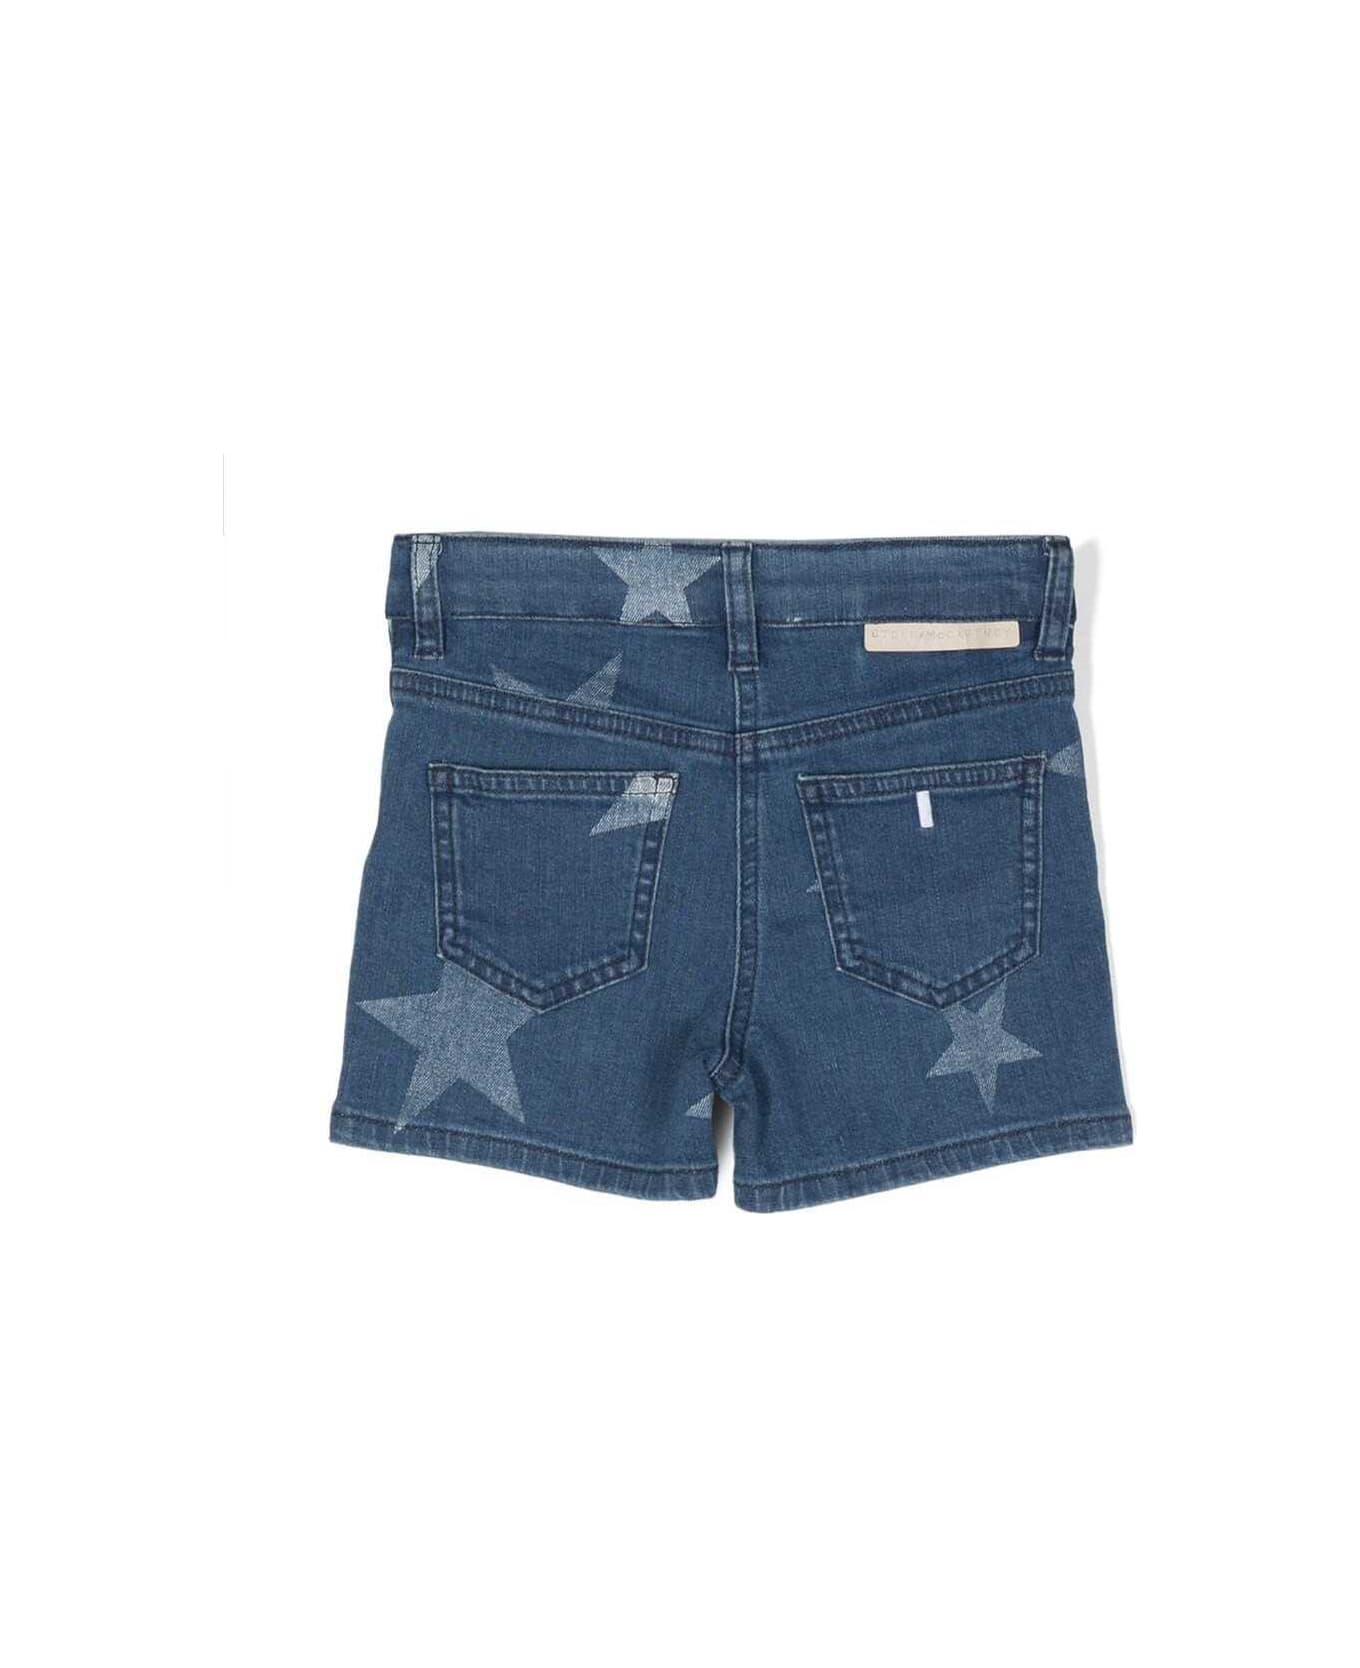 Stella McCartney Kids Denim Shorts With All-over Star-print In Blue Cotton Girl - Blue ボトムス